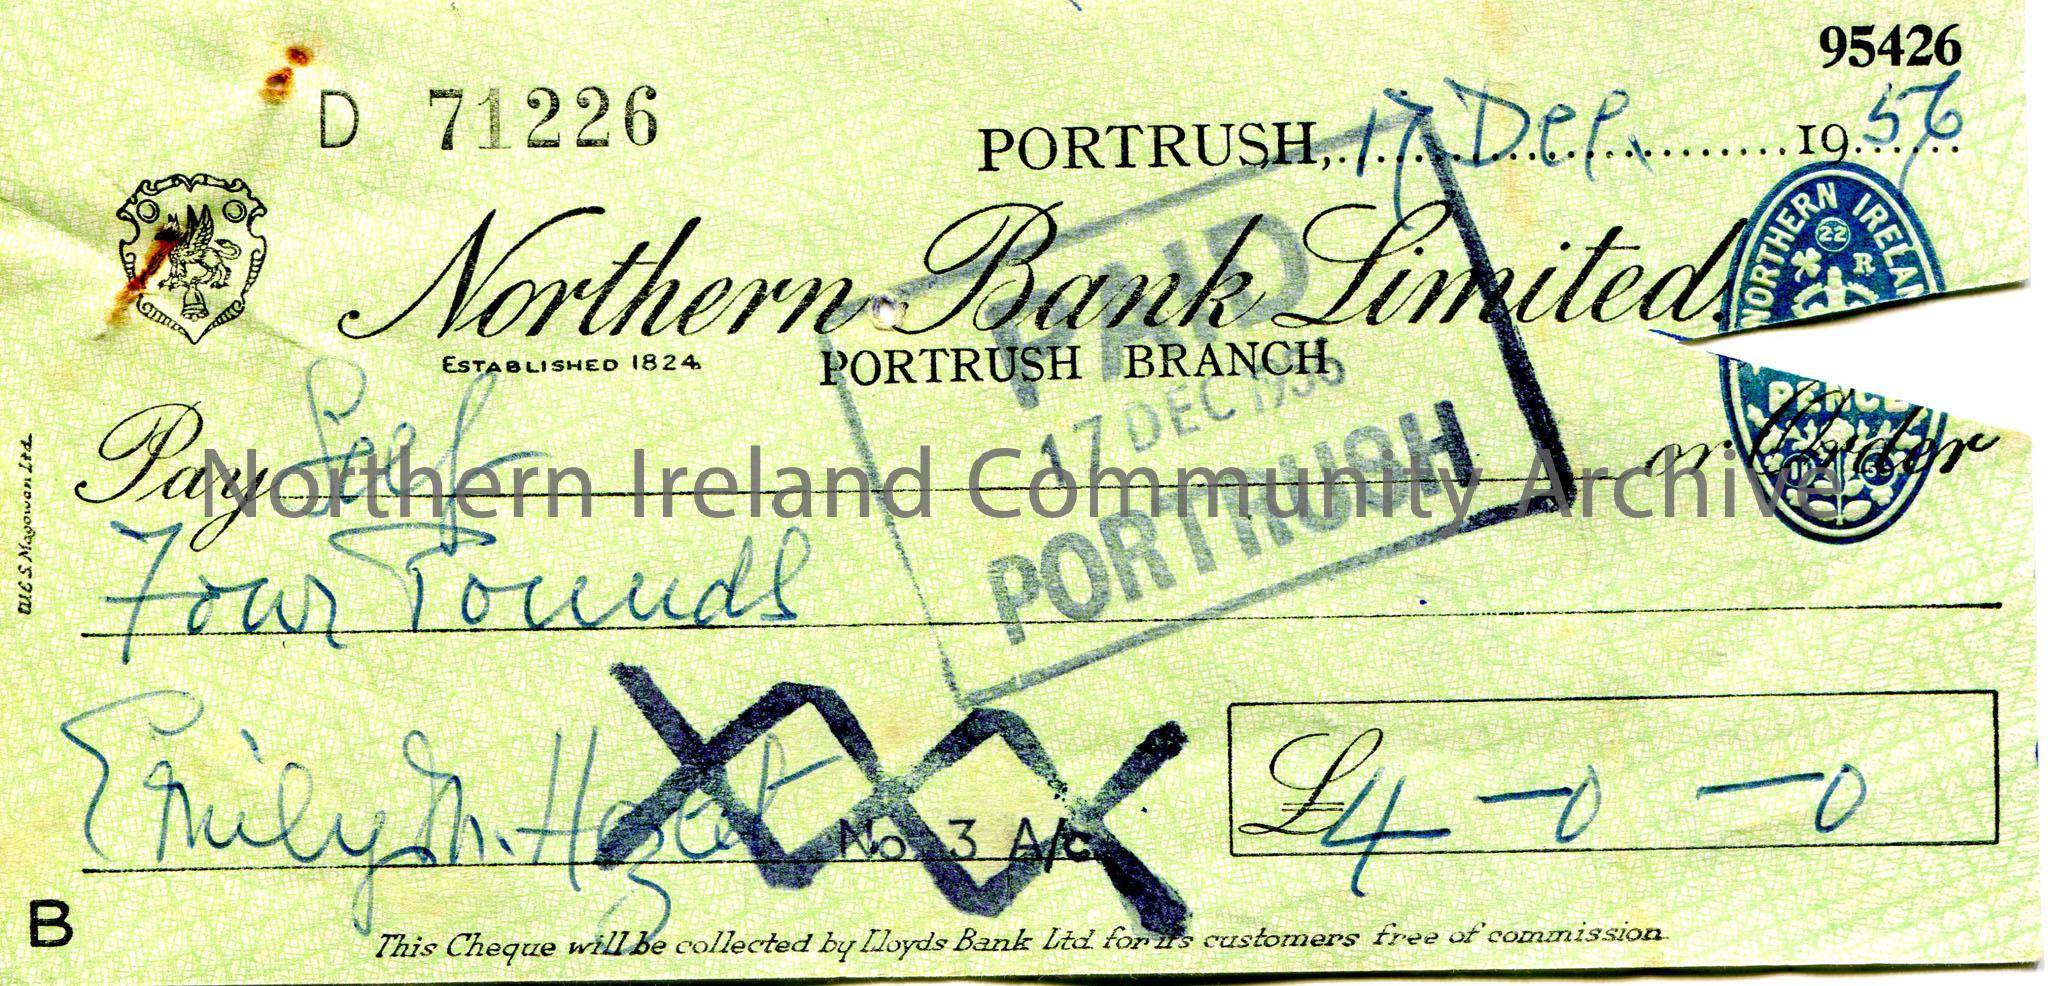 Handwritten Northern Bank Limited, Portrush branch cheque, no 71226. Payable to ‘Self’ from Emily M. Hezlet for £4.0.0. Dated 17th December, 1956…